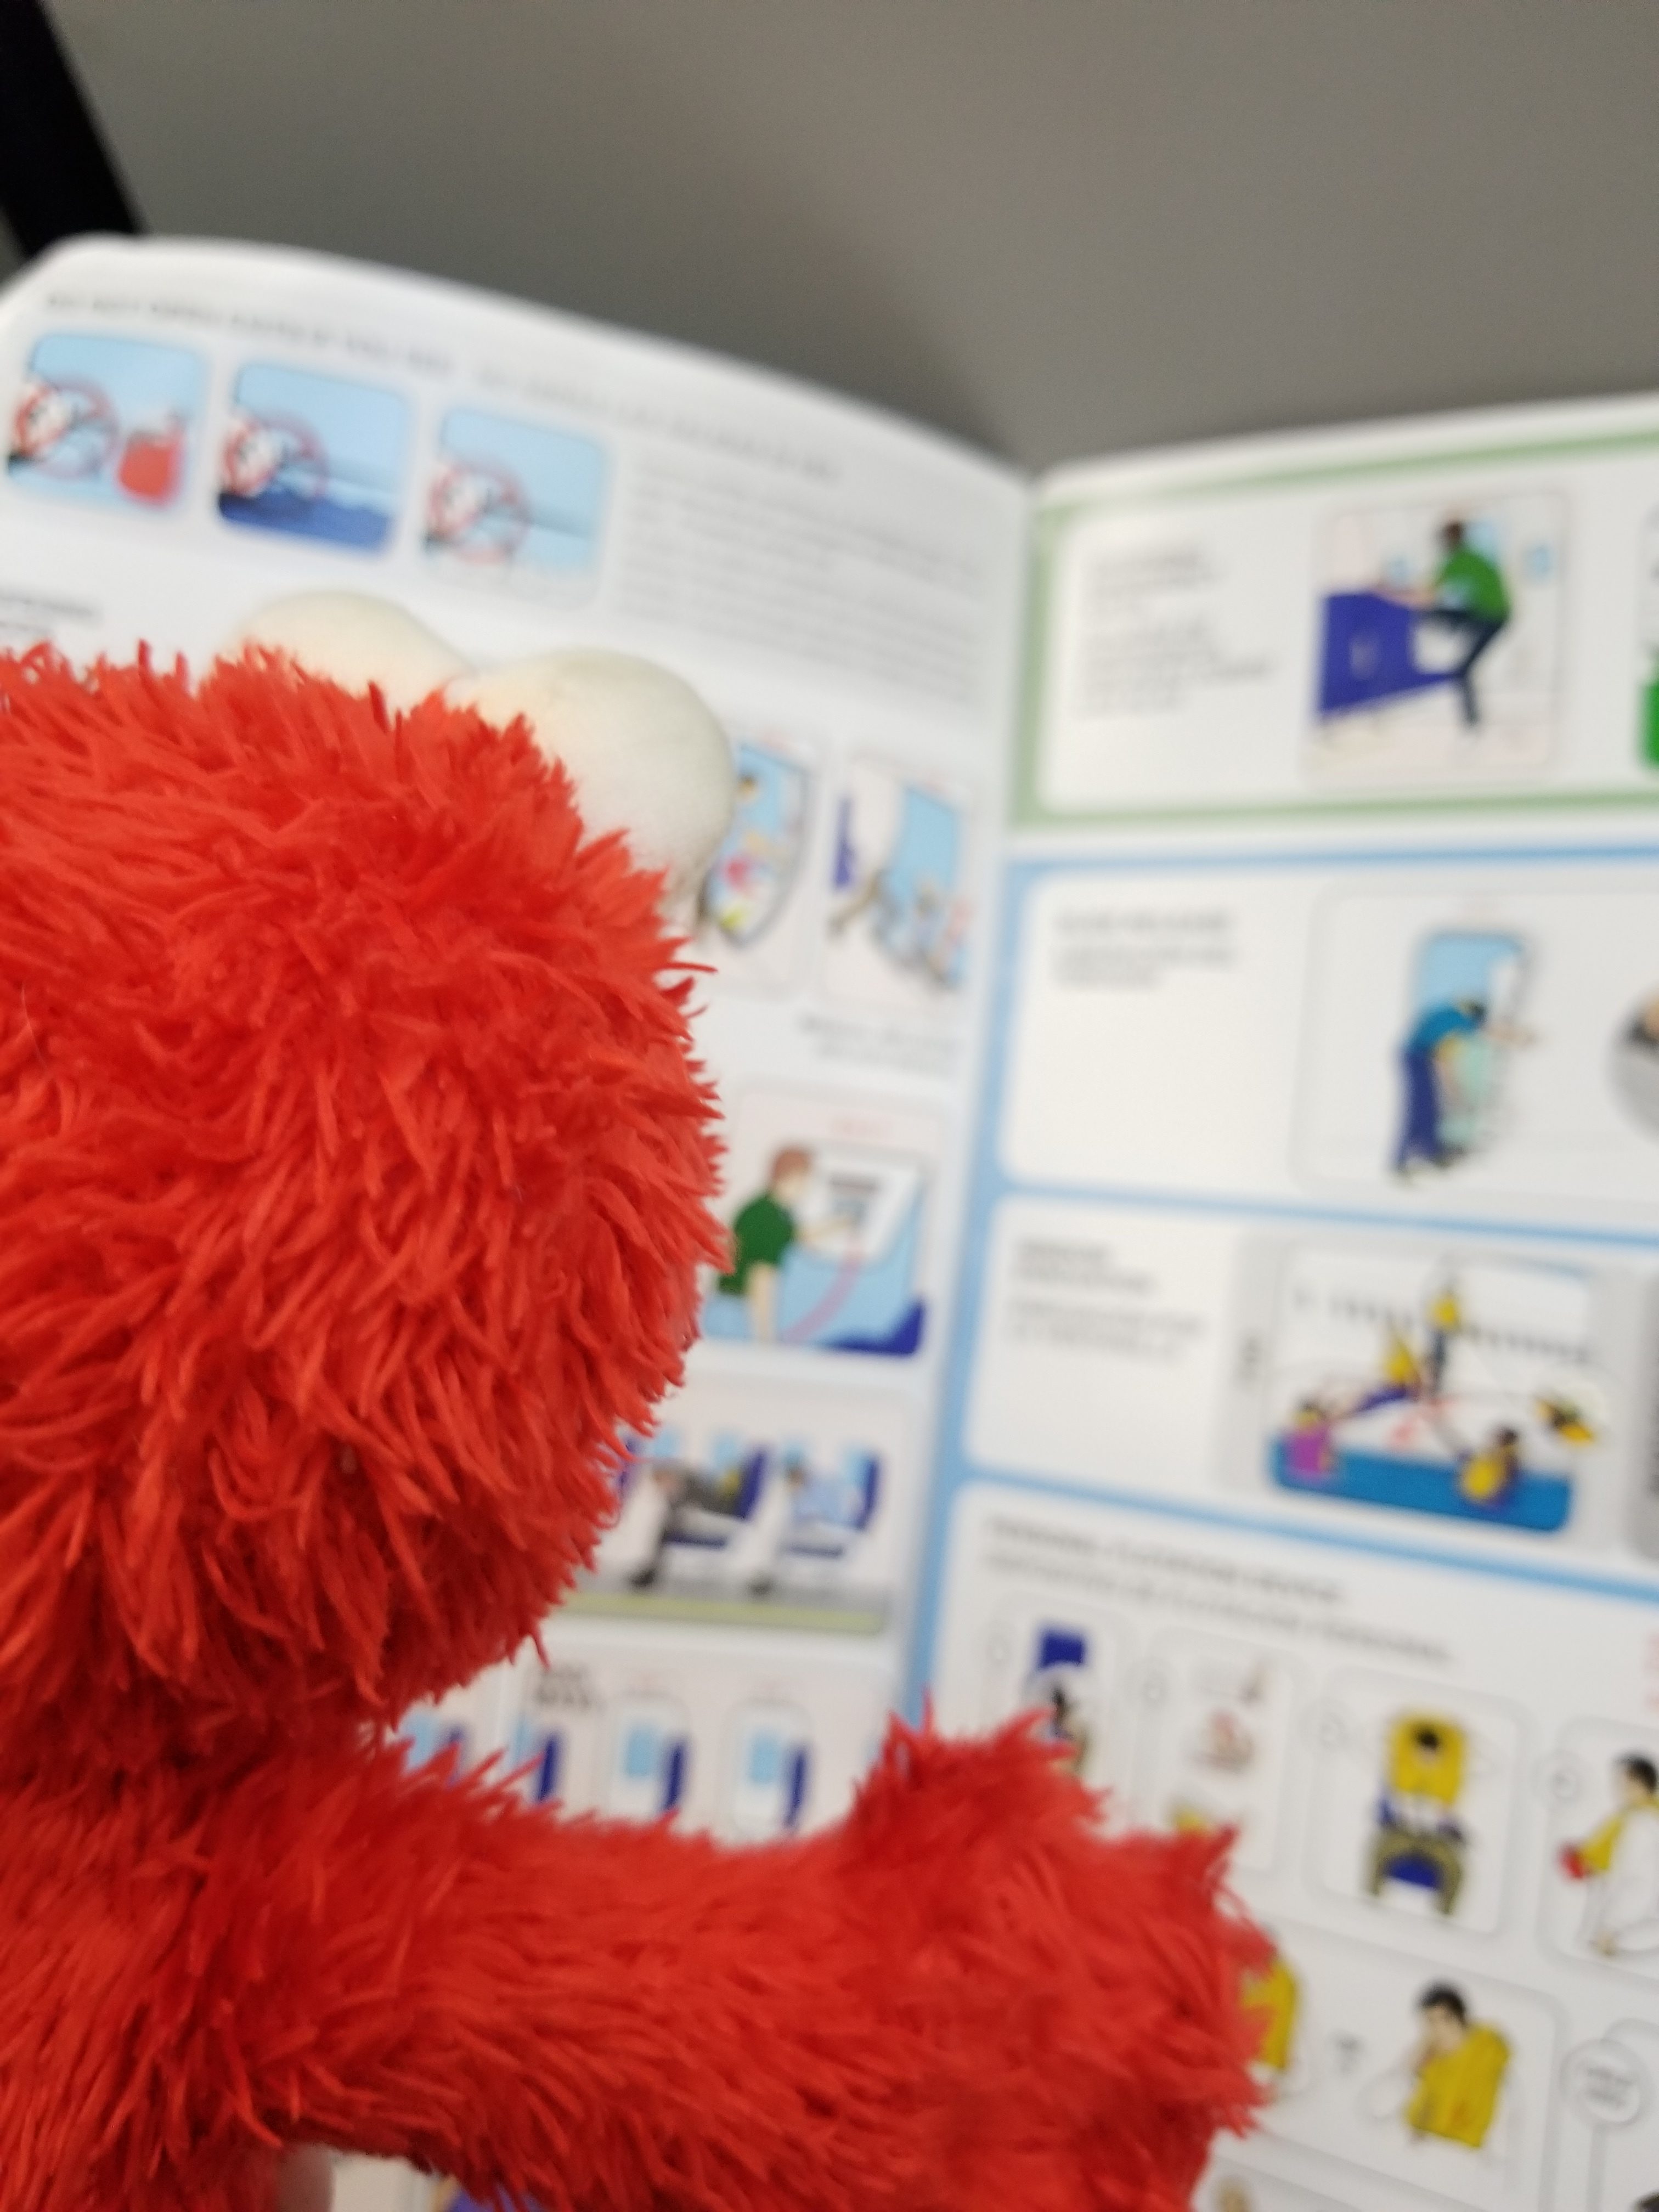 Elmo Checks the Aircraft Features and Safety Instructions